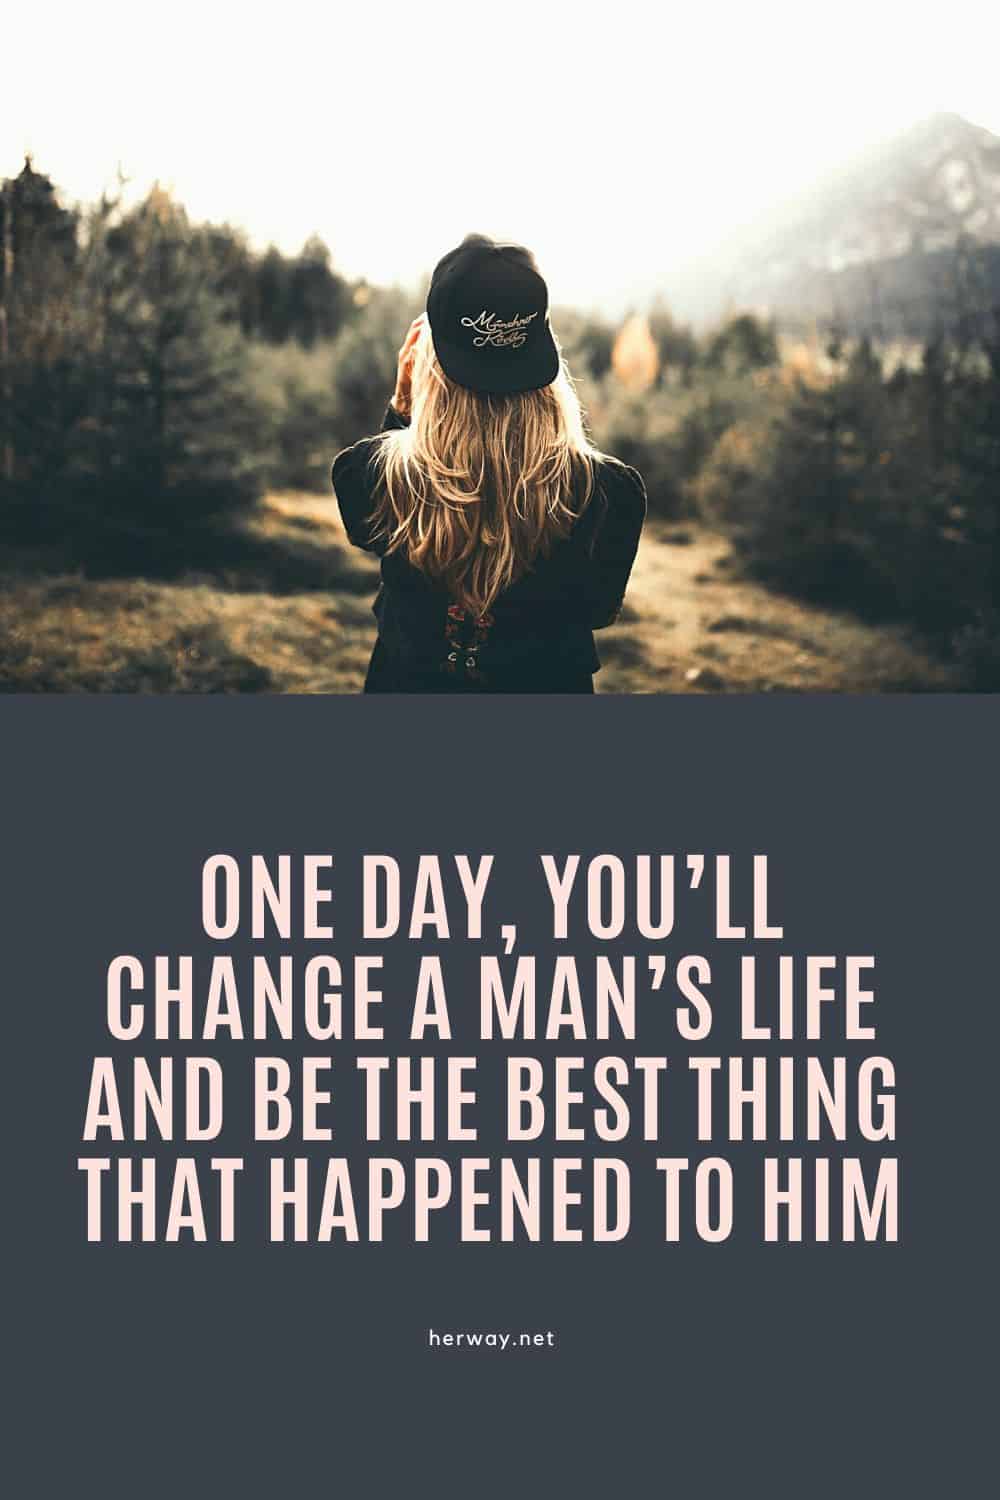 One Day, You’ll Change A Man’s Life And Be The Best Thing That Happened To Him